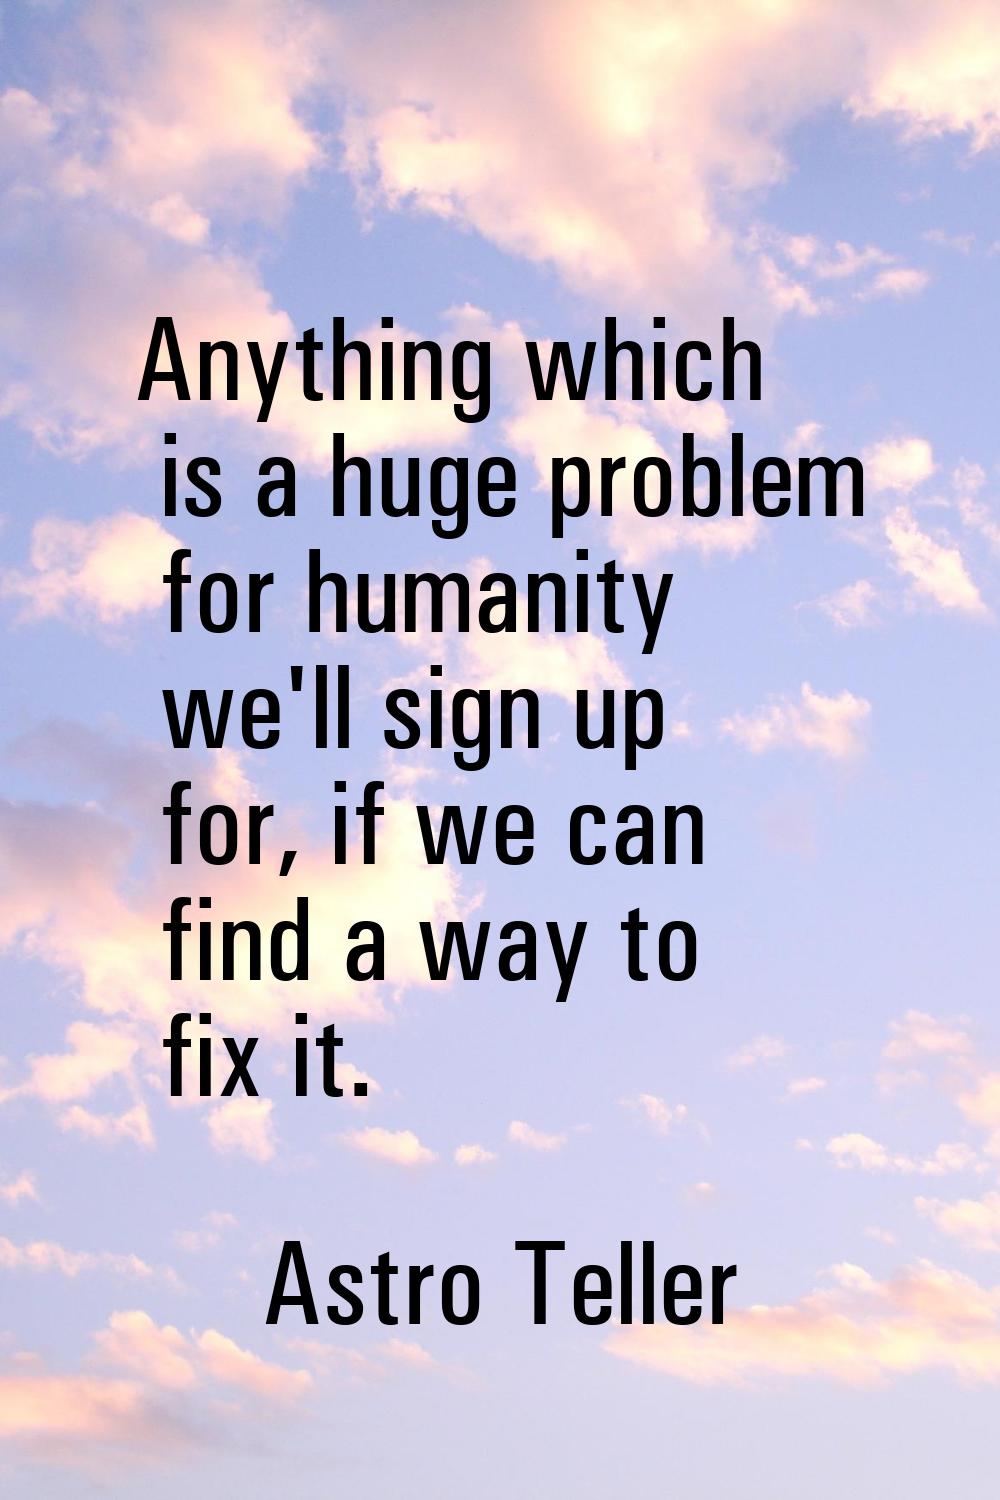 Anything which is a huge problem for humanity we'll sign up for, if we can find a way to fix it.